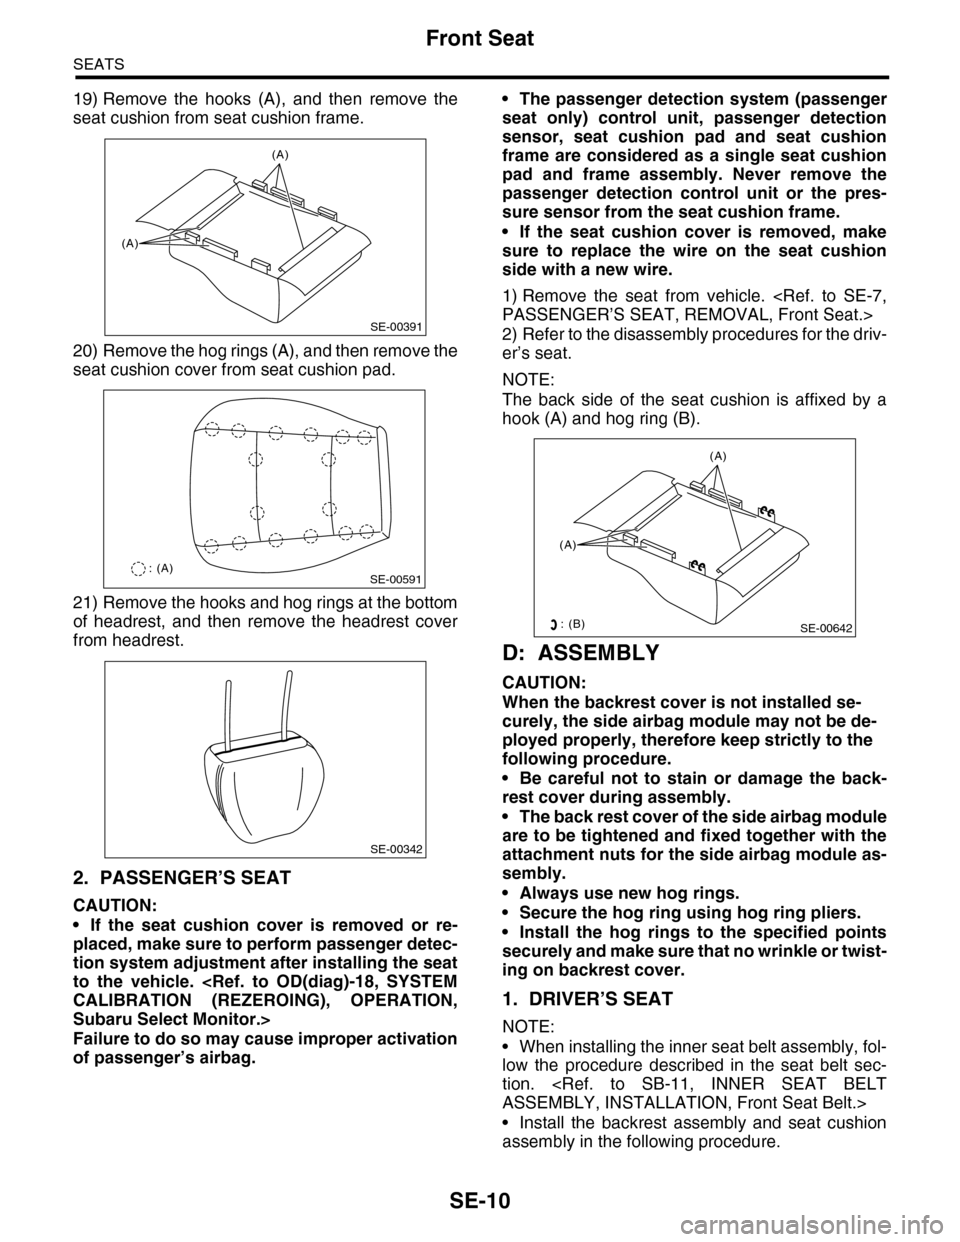 SUBARU TRIBECA 2009 1.G Service Workshop Manual SE-10
Front Seat
SEATS
19) Remove  the  hooks  (A),  and  then  remove  the
seat cushion from seat cushion frame.
20) Remove the hog rings (A), and then remove the
seat cushion cover from seat cushion